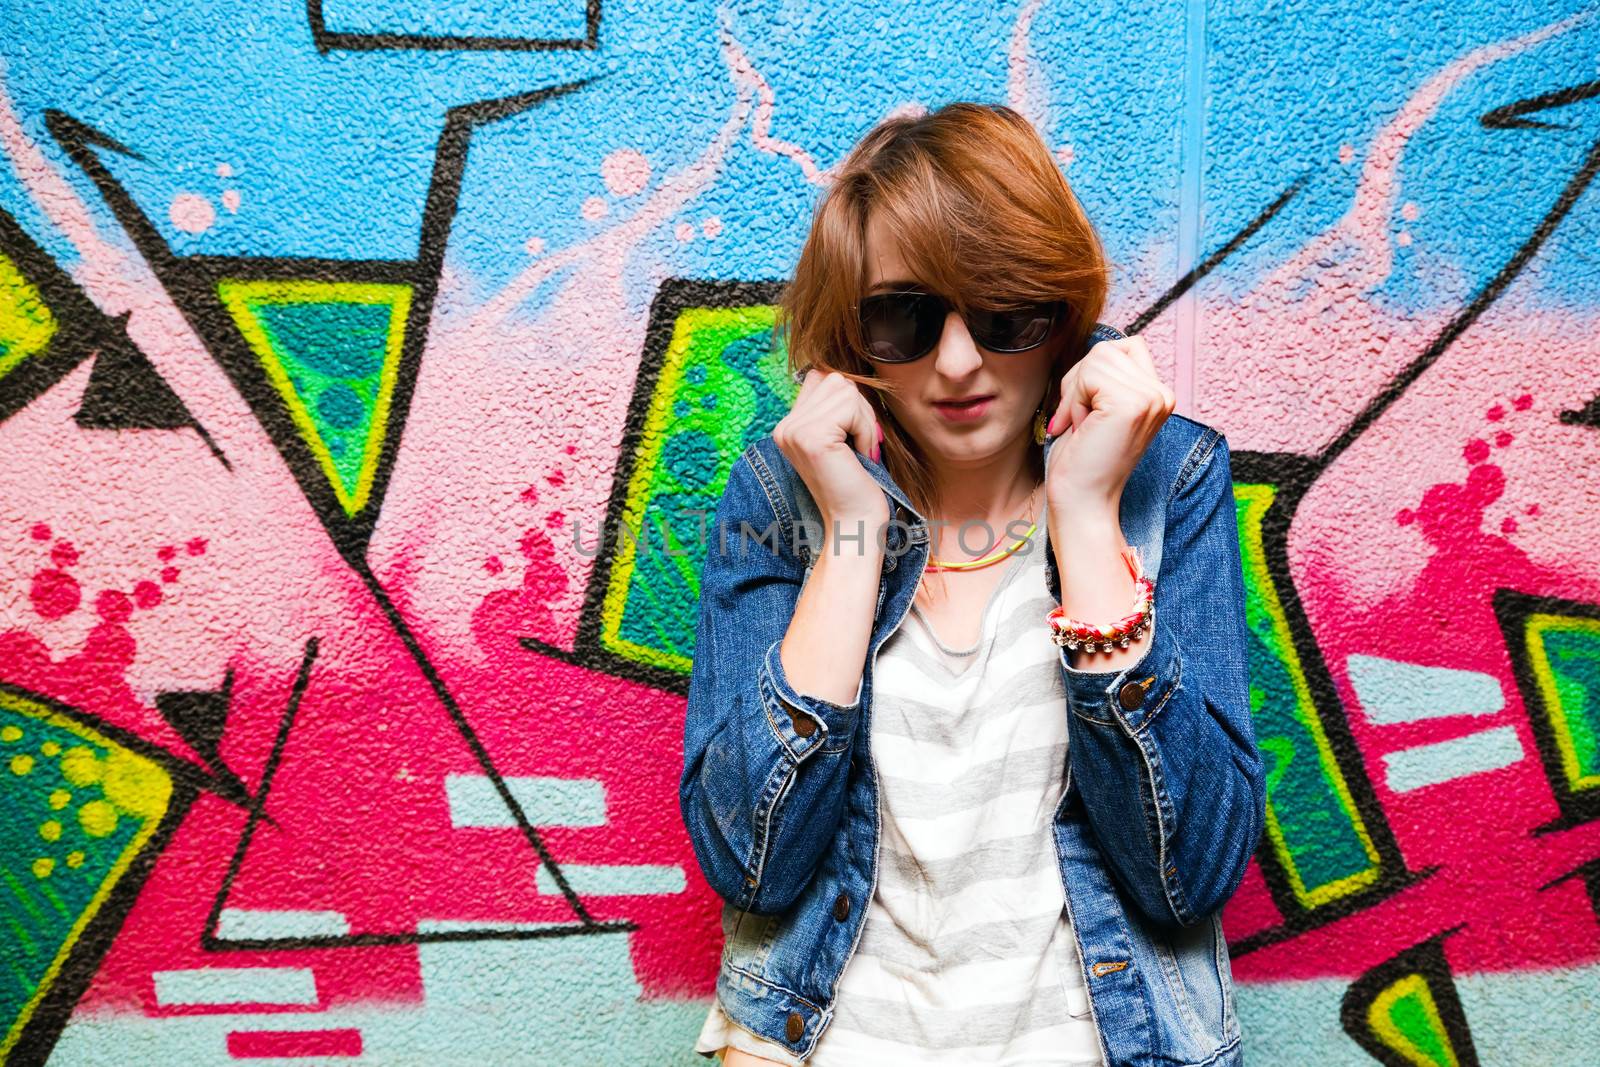 Stylish fashionable girl in jeans jacket portrait against colorful graffiti wall. Fashion, trends, subculture.